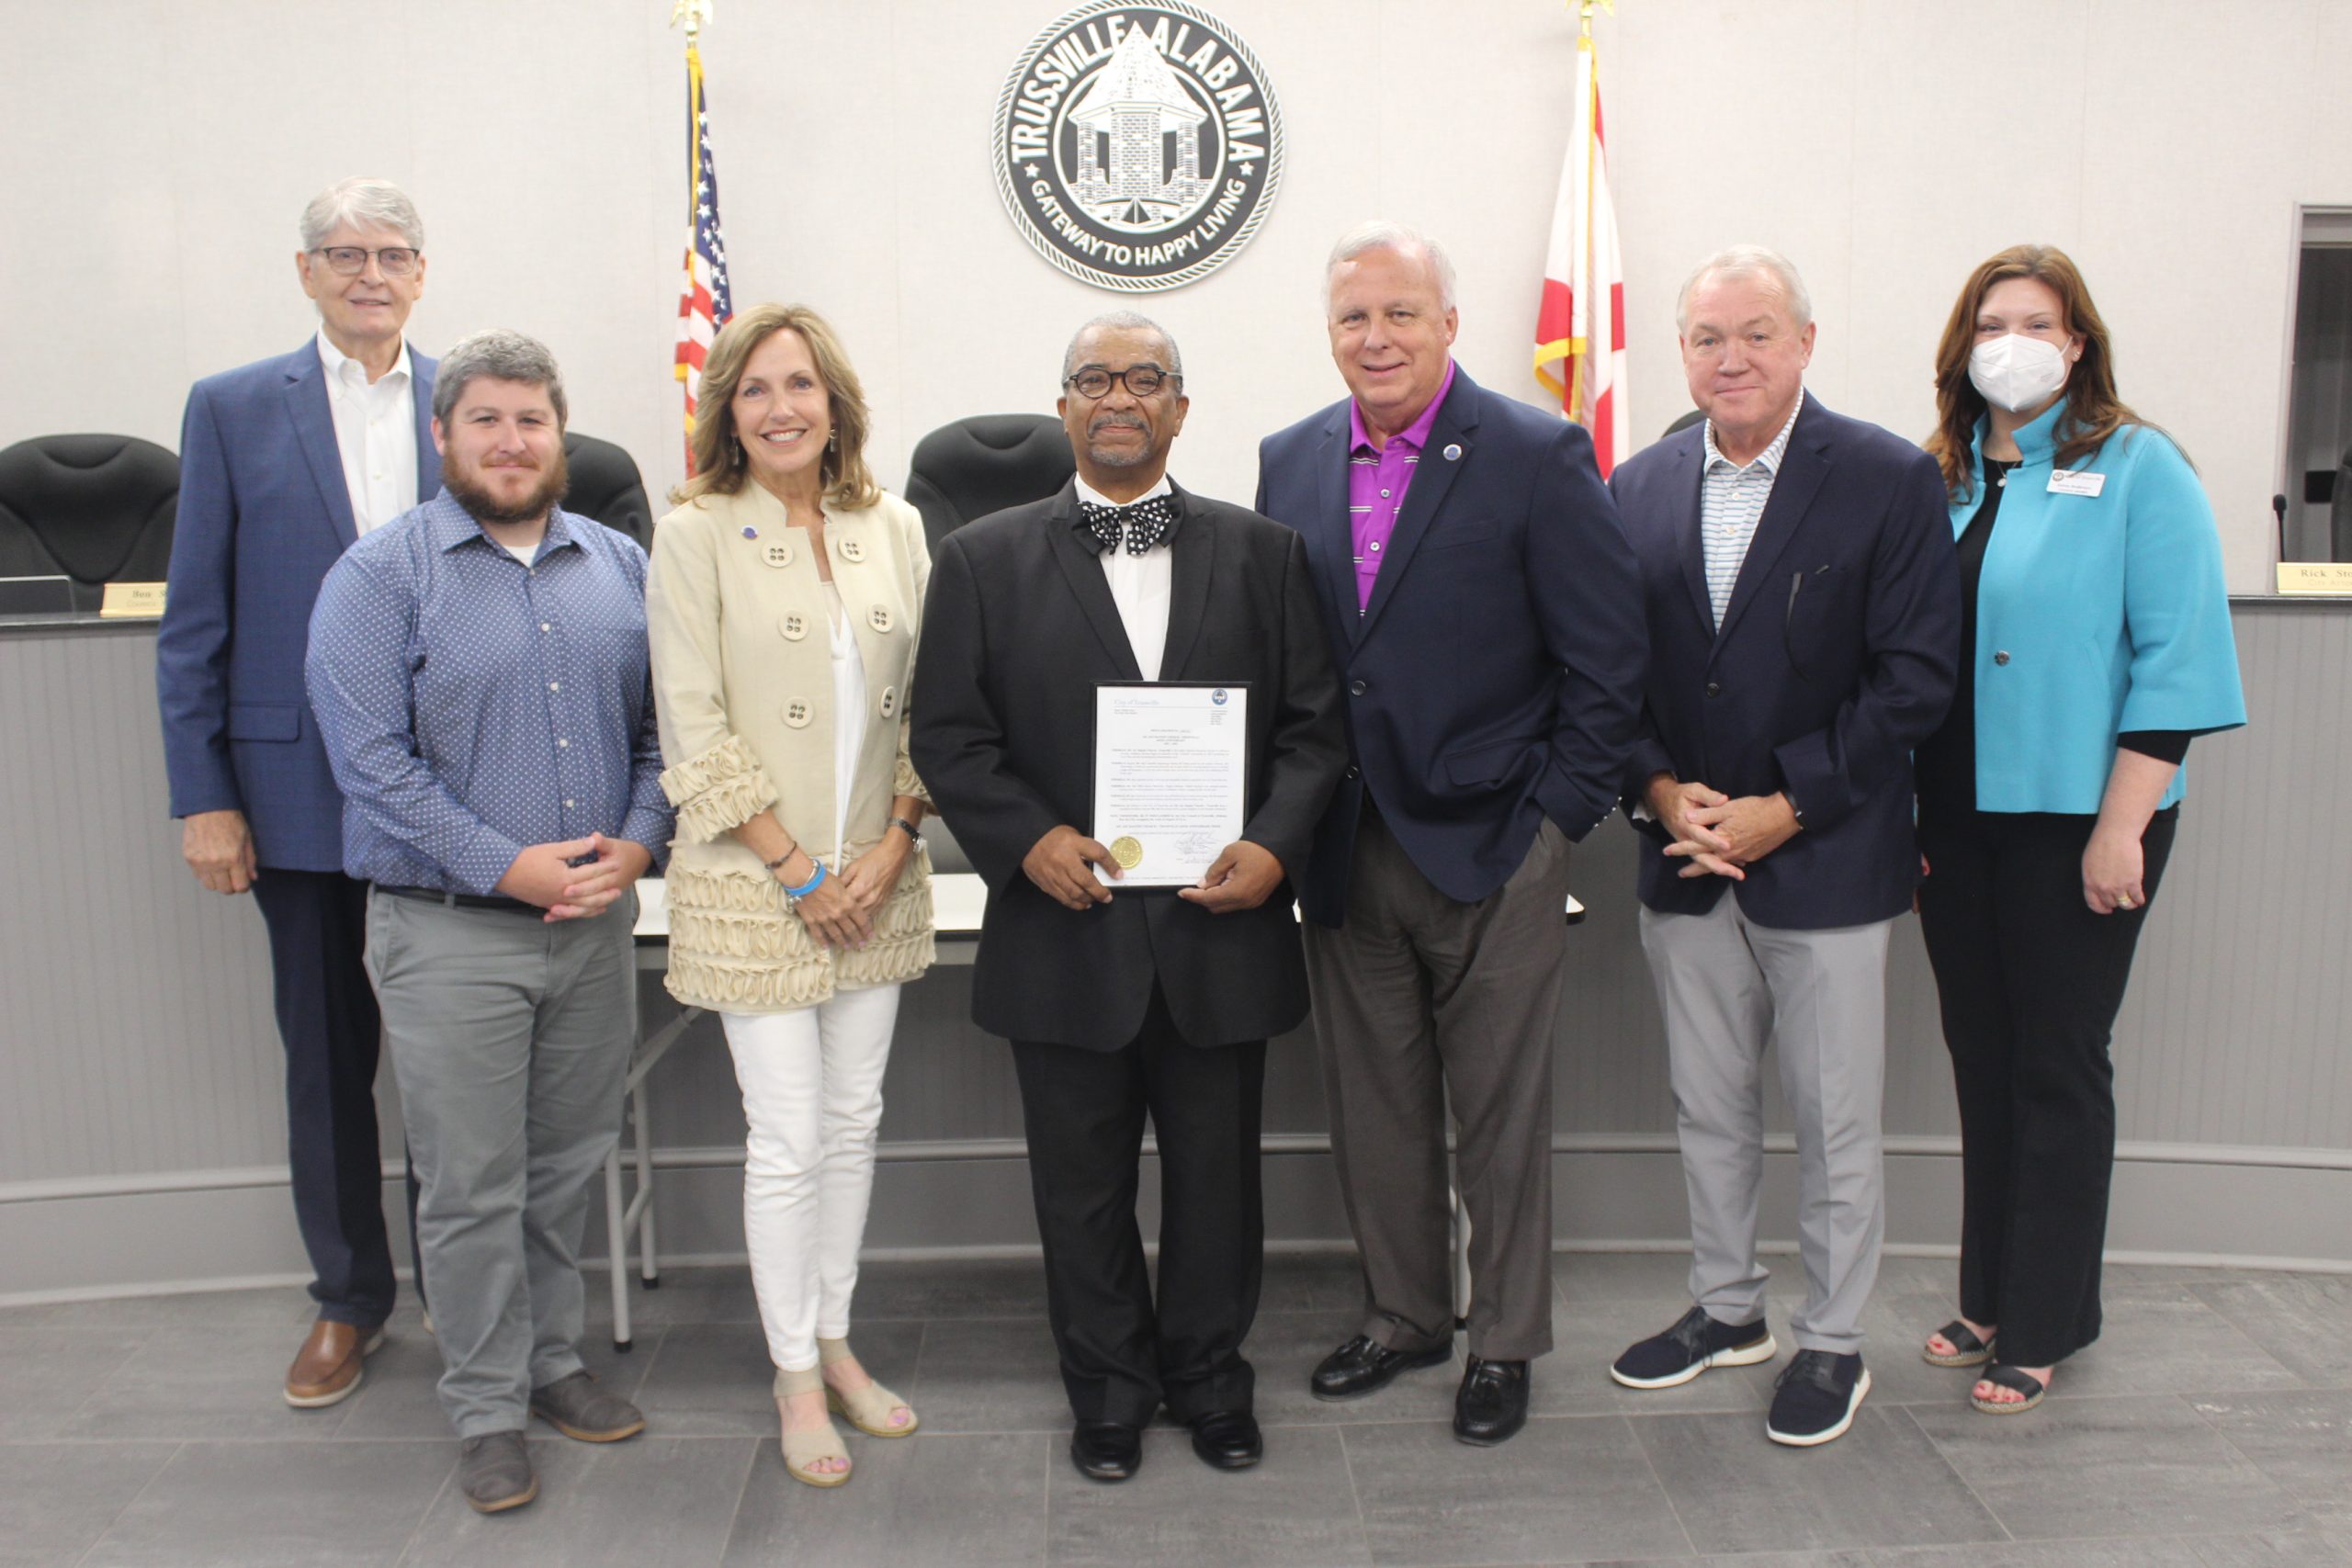 Trussville Council approves proclamation honoring Mt. Joy Baptist Church’s 165th Anniversary